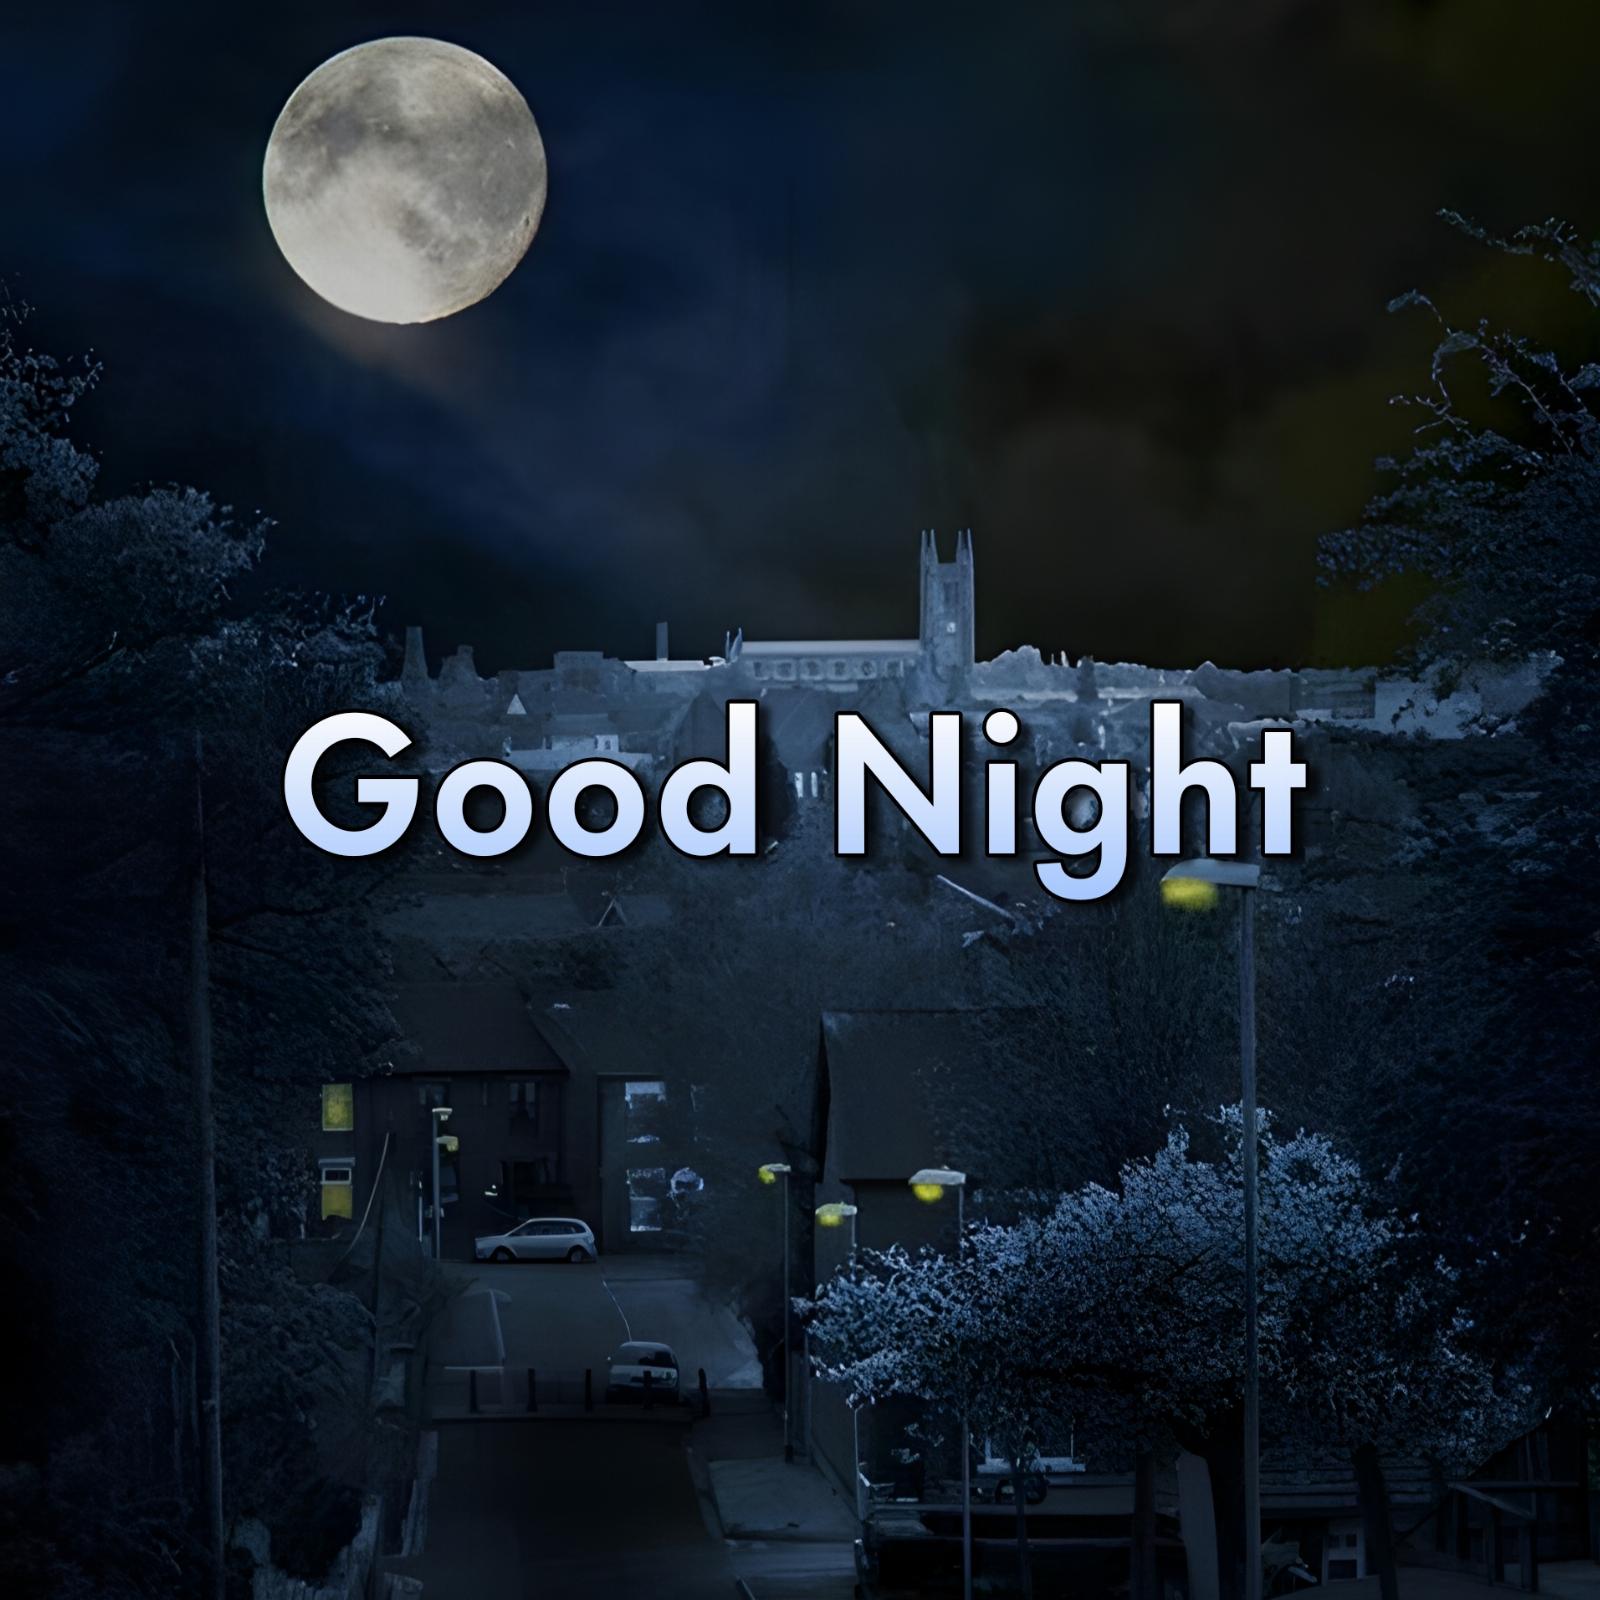 Good Night Moon Images HD Download